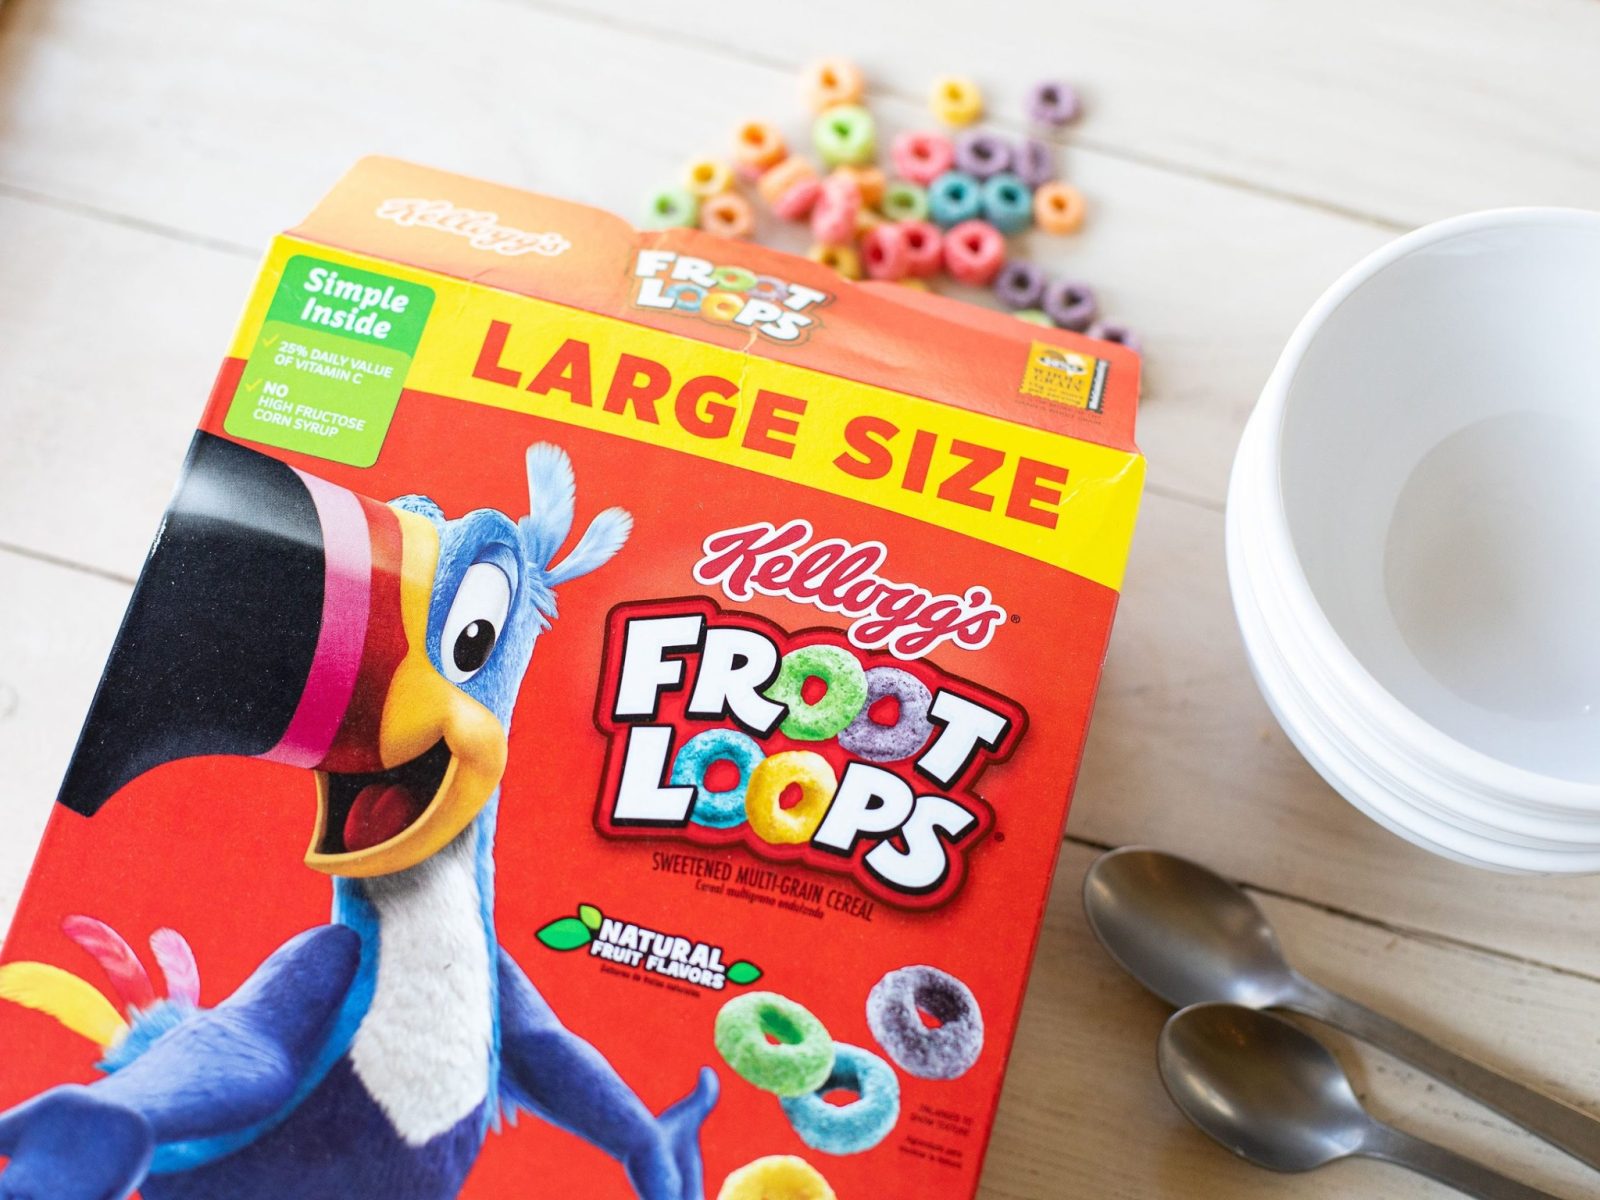 Kellogg’s Cereal Large Size Boxes Are BOGO This Week At Publix – Get The Boxes As Low As $1.63